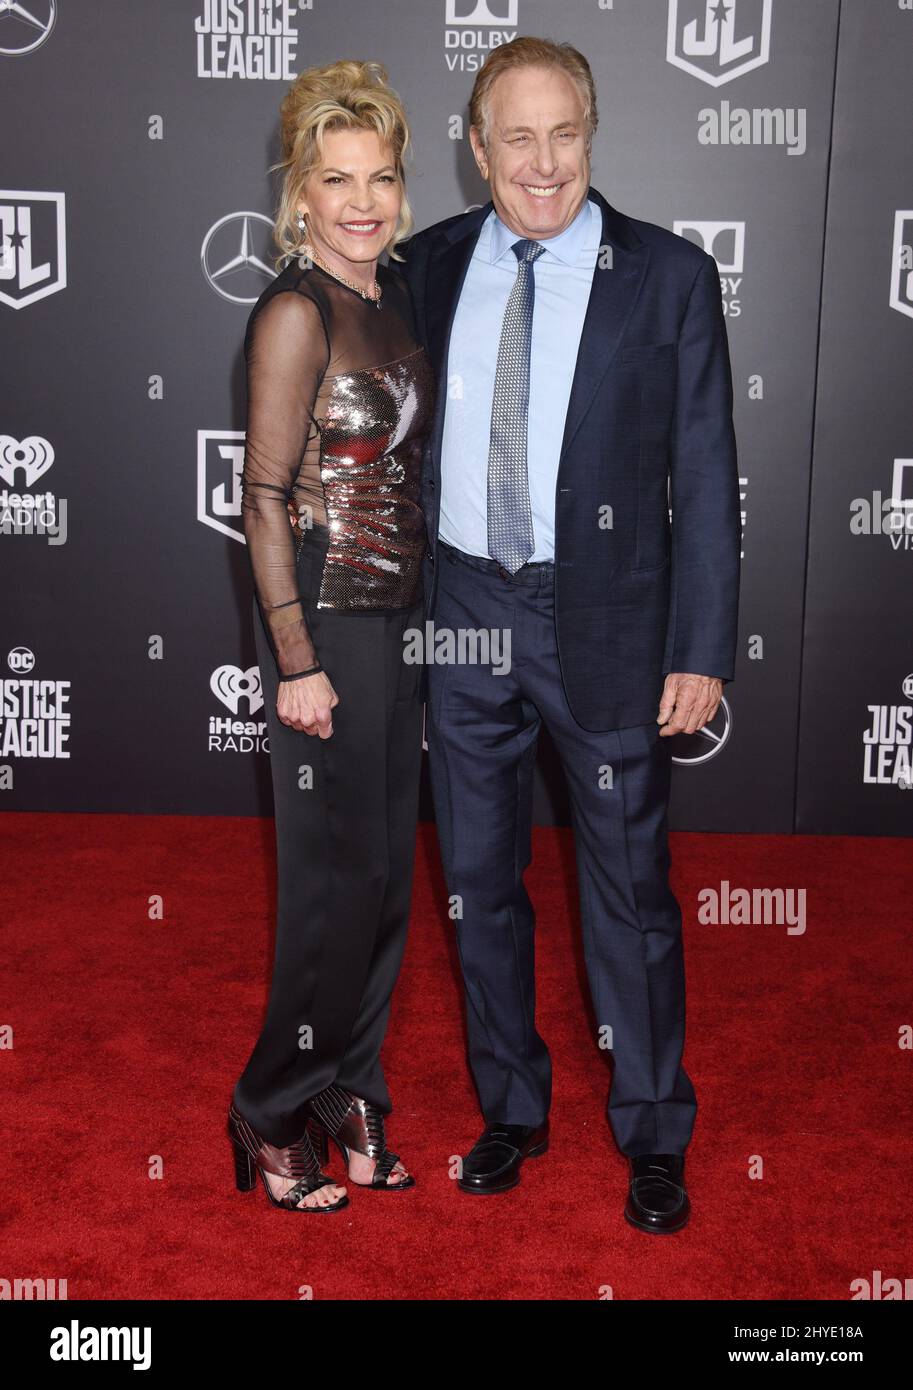 Charles Roven and Stephanie Haymes attending the world premiere of Justice League held at the Dolby Theatre in Hollywood, California Stock Photo